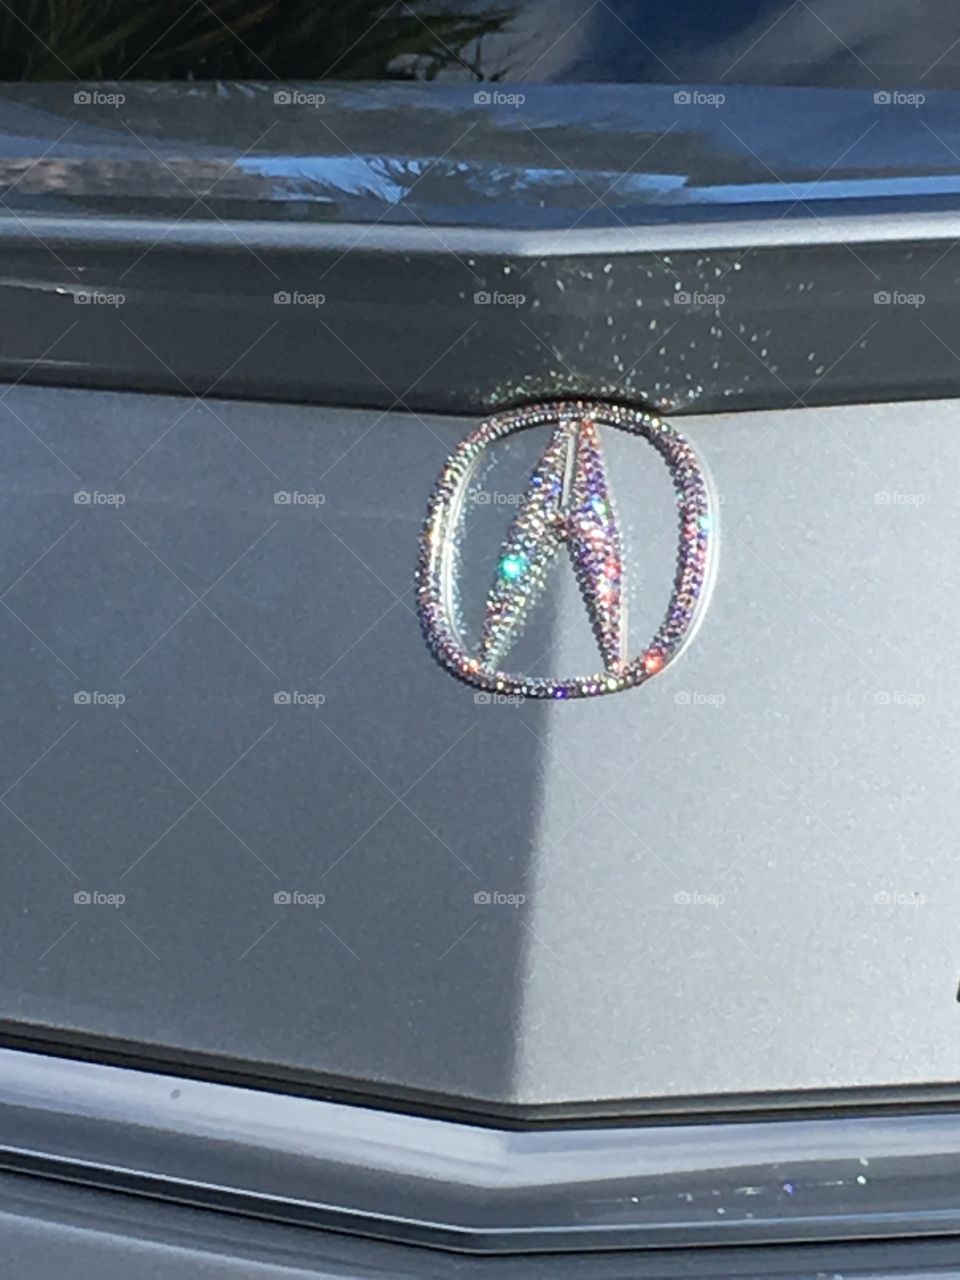 Bling bling Acura special edition 